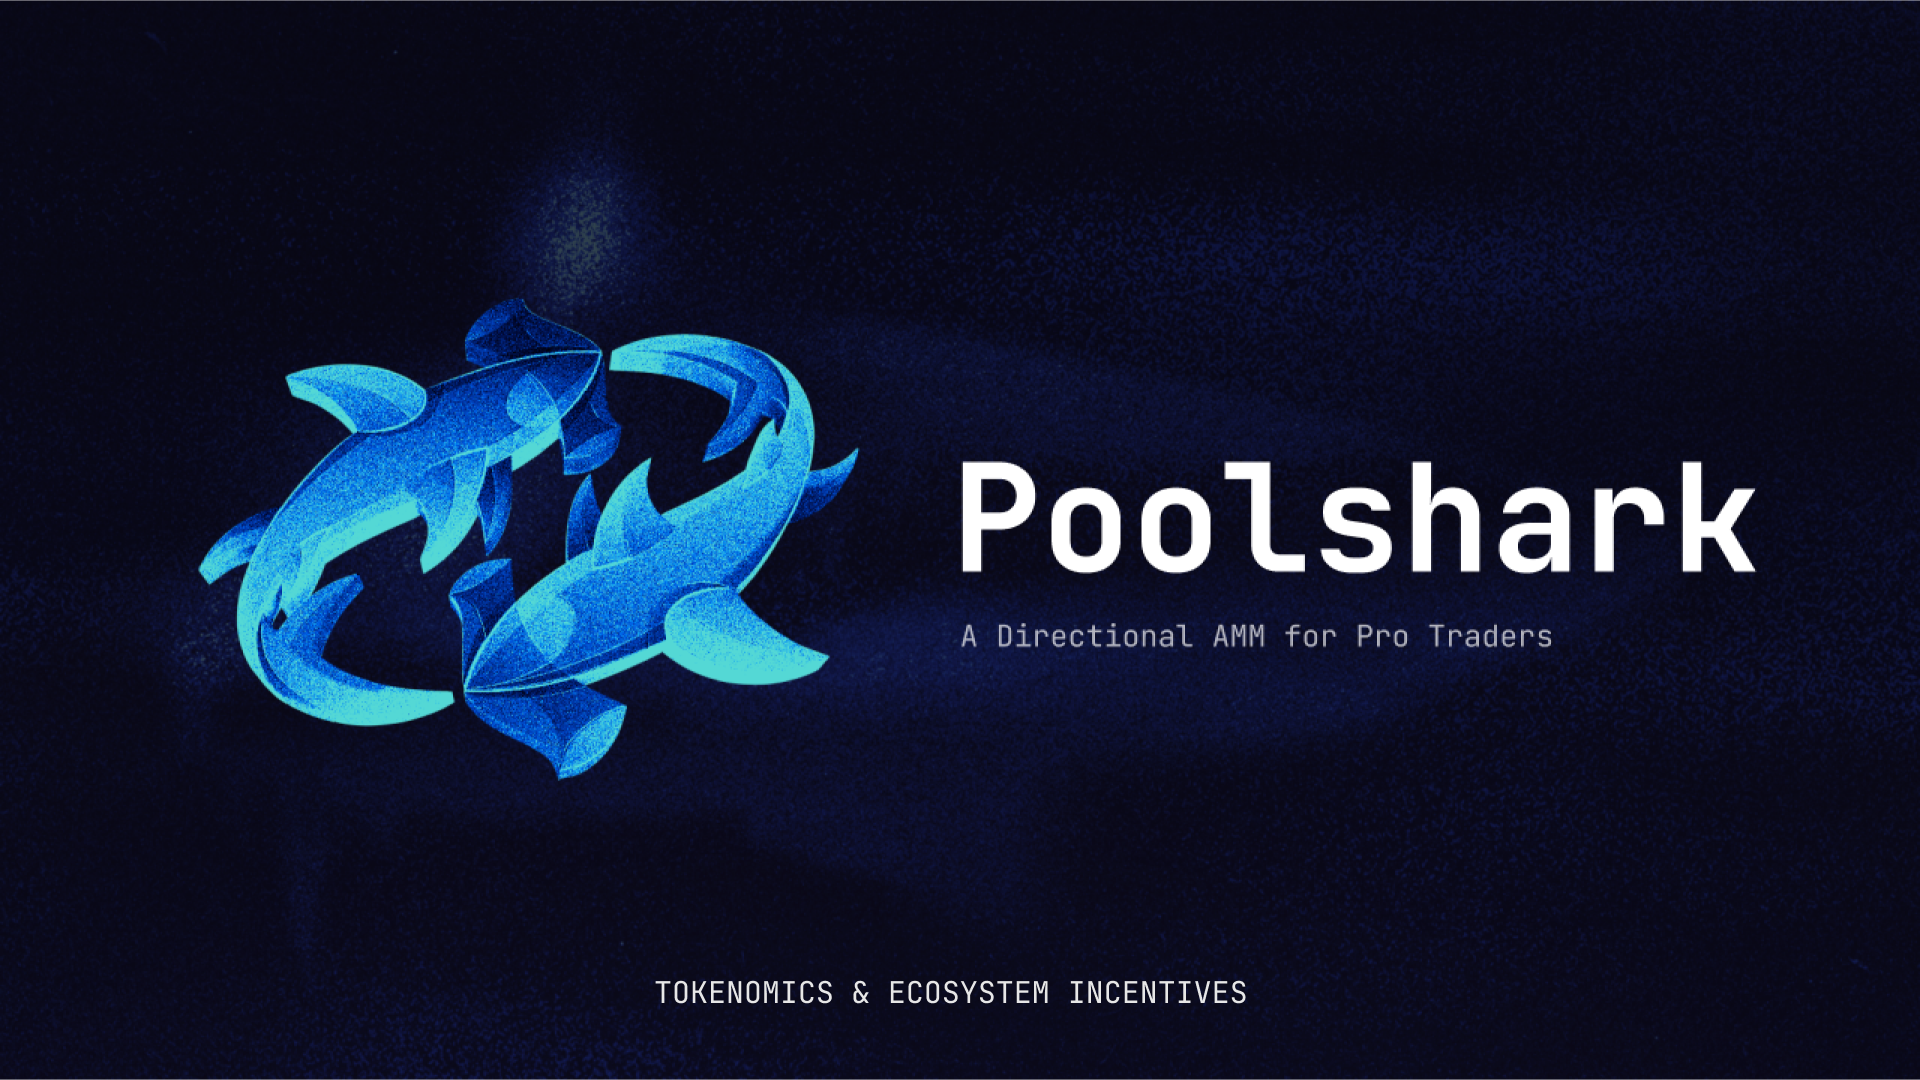 Poolshark aims to build Defensible Liquidity for its AMM offering